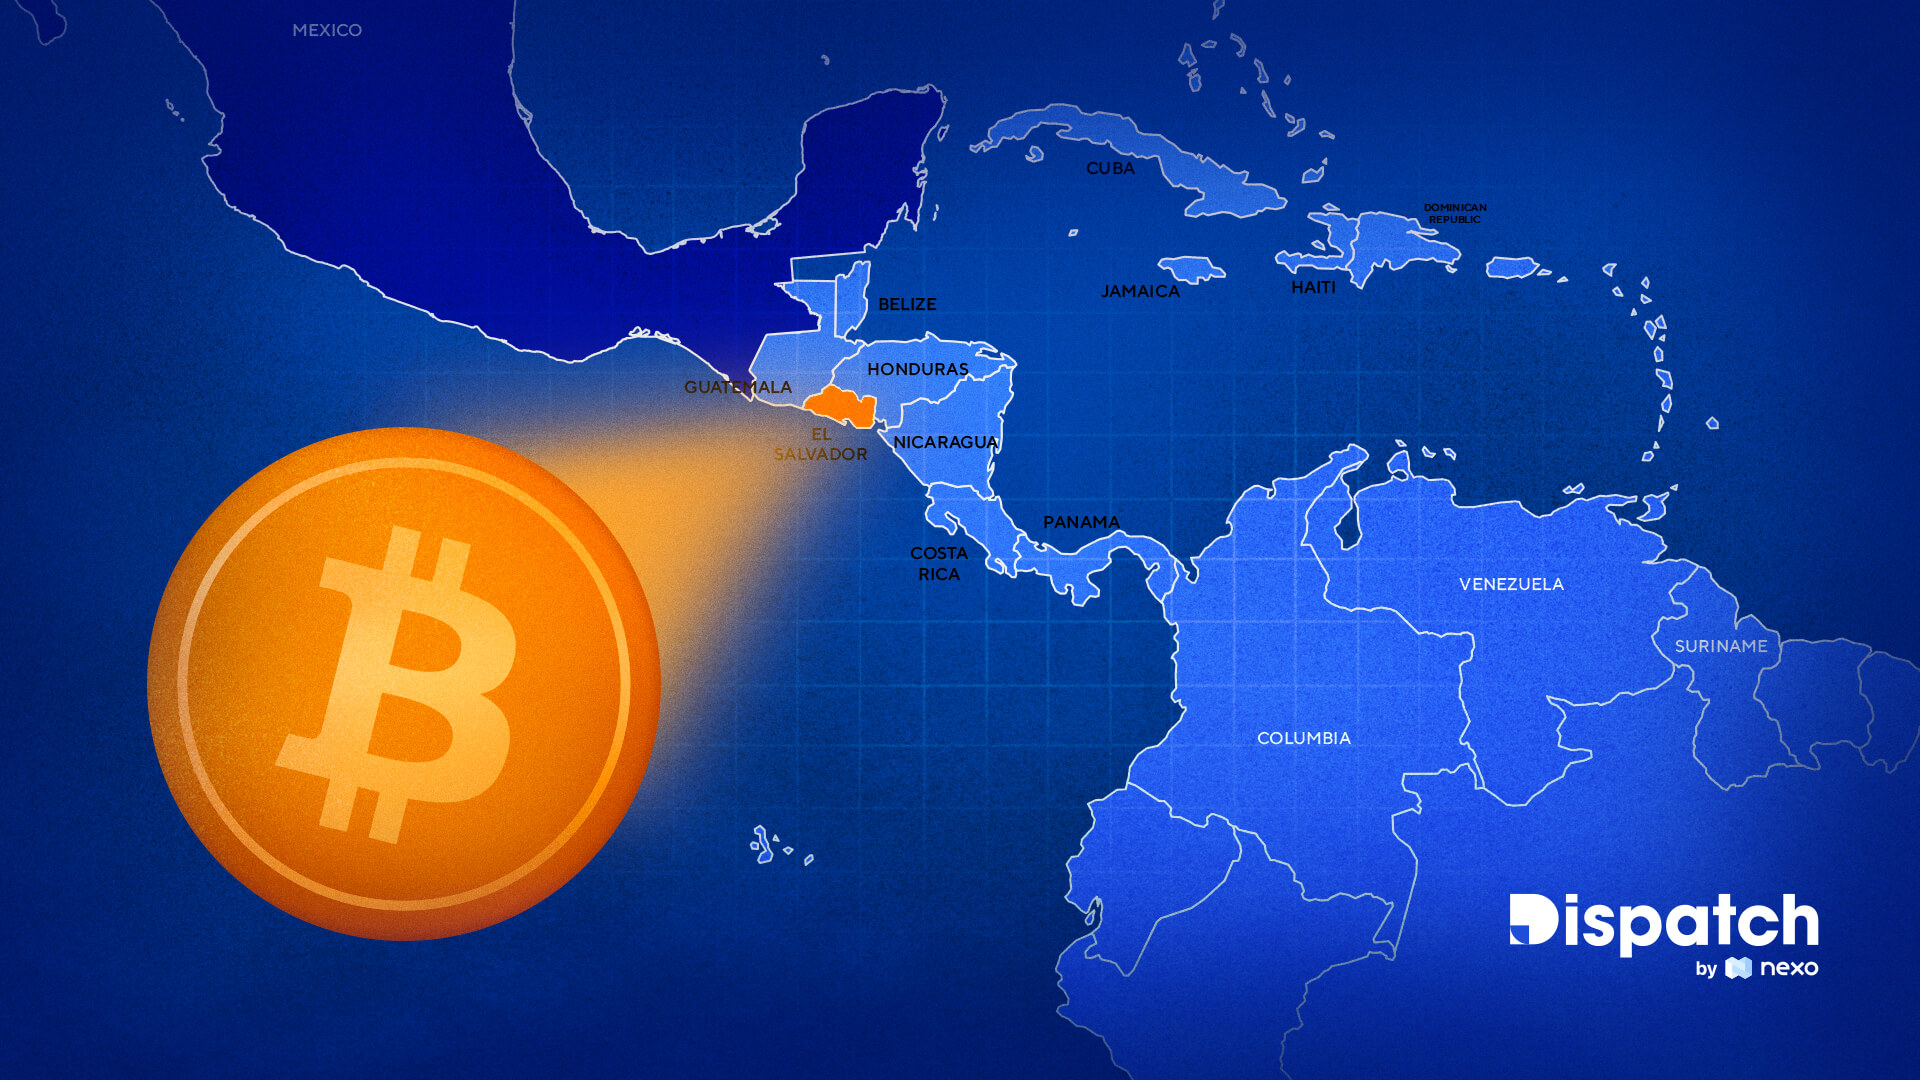 Dispatch #39: The One with El Salvador Leading the World on Bitcoin